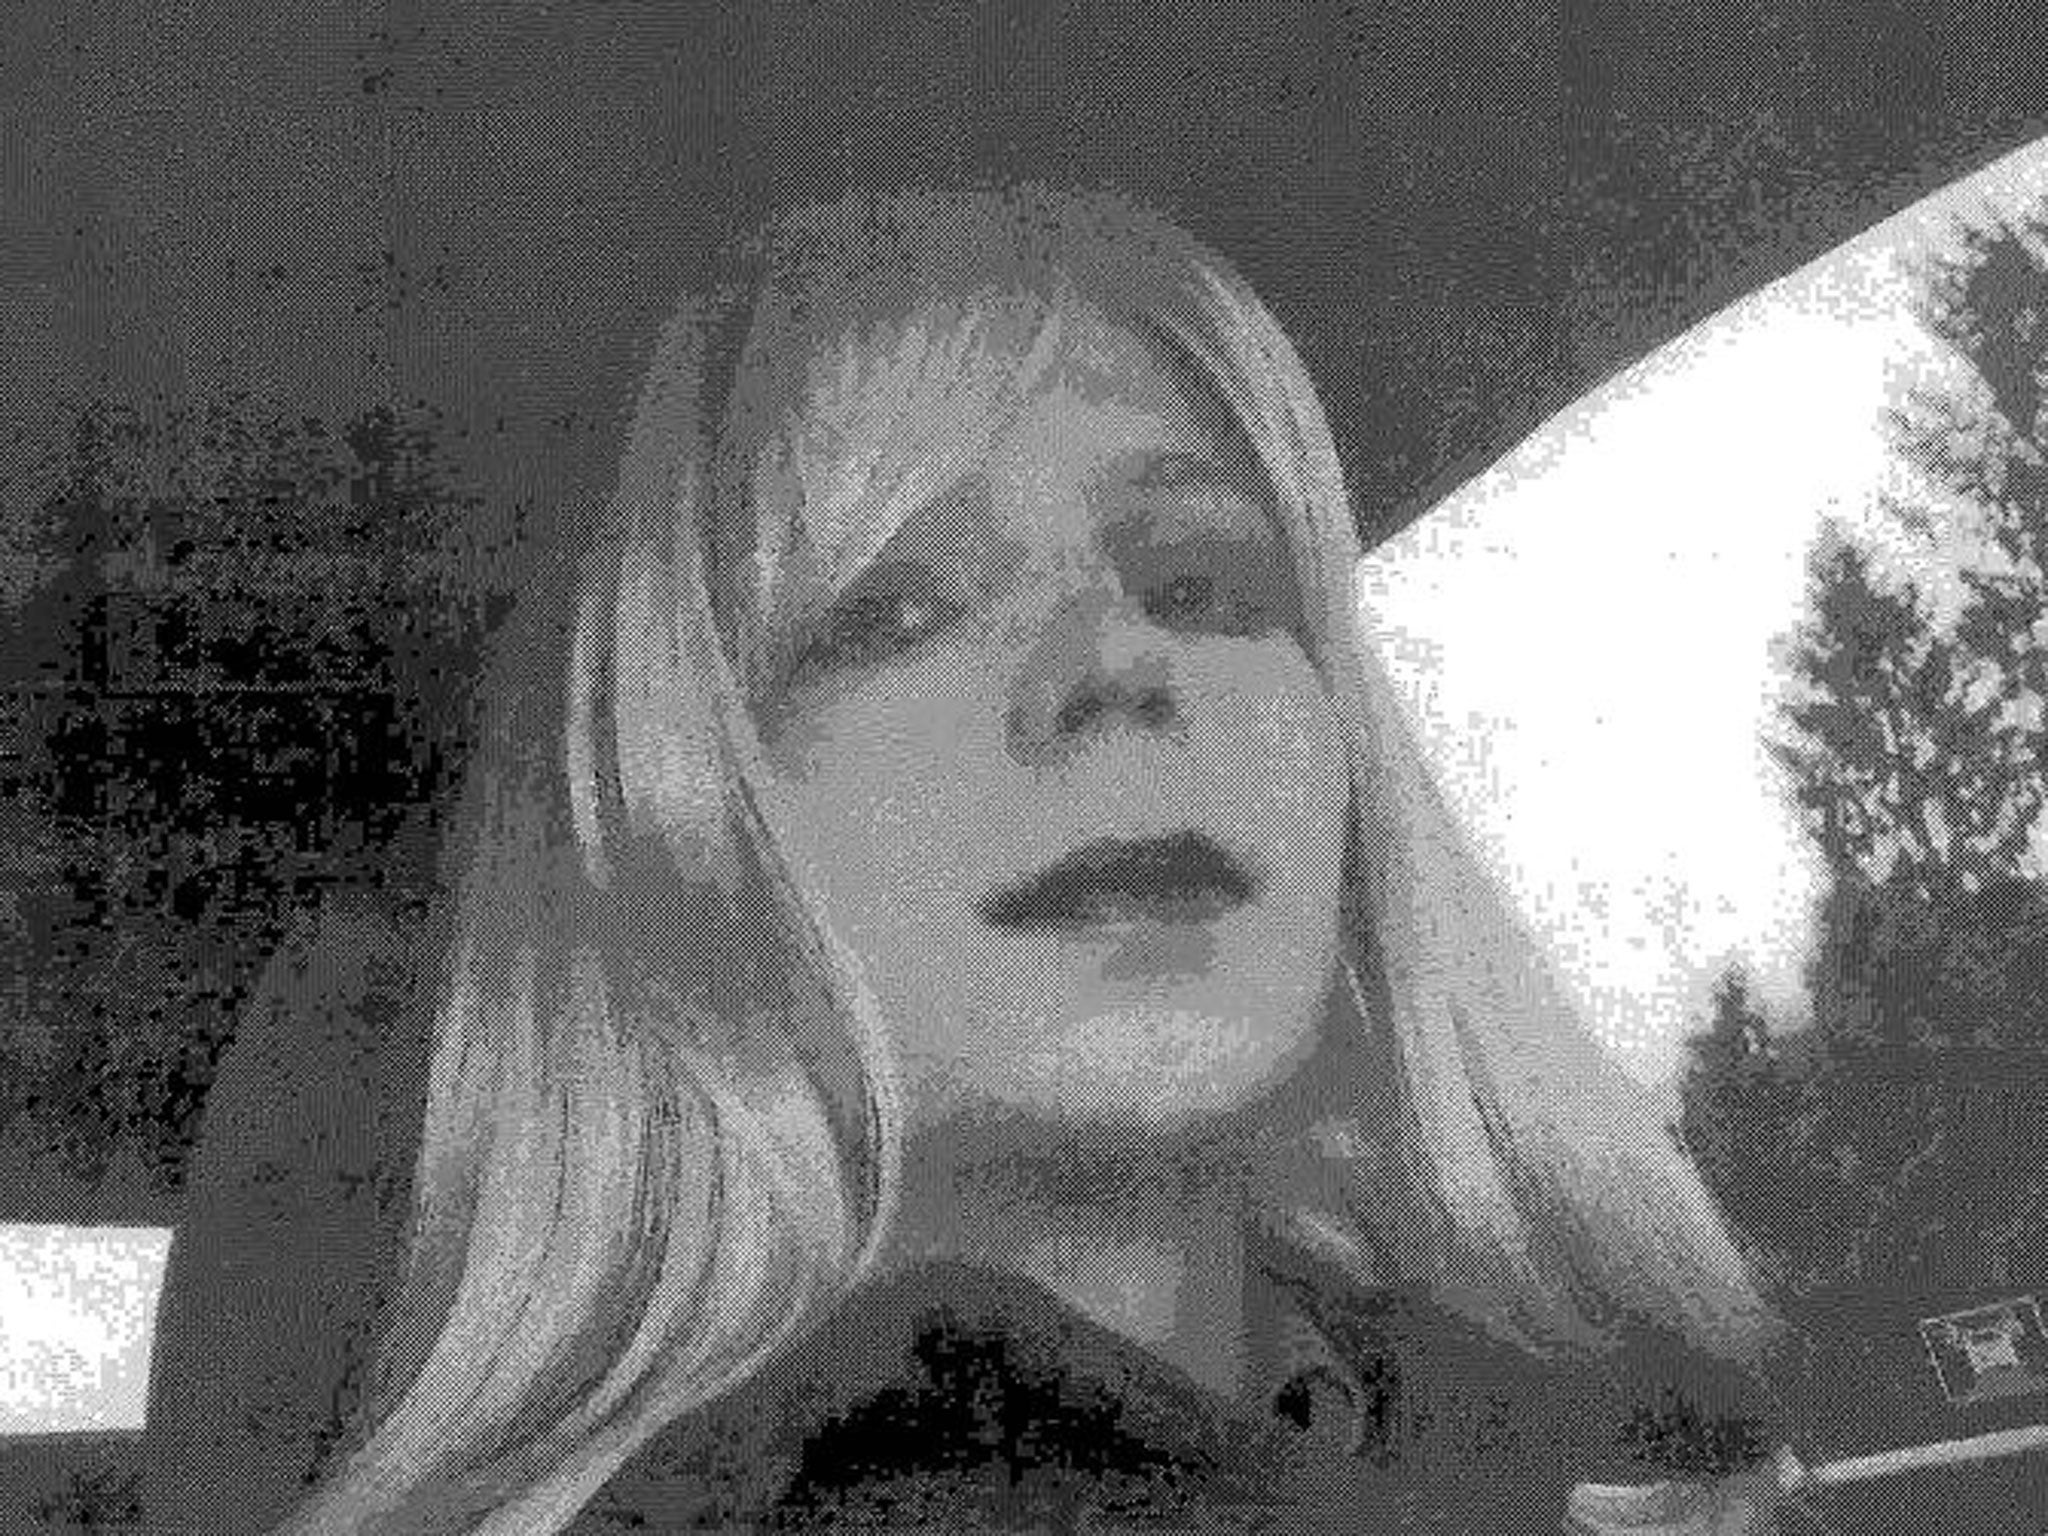 Chelsea Manning could face solitary confinement